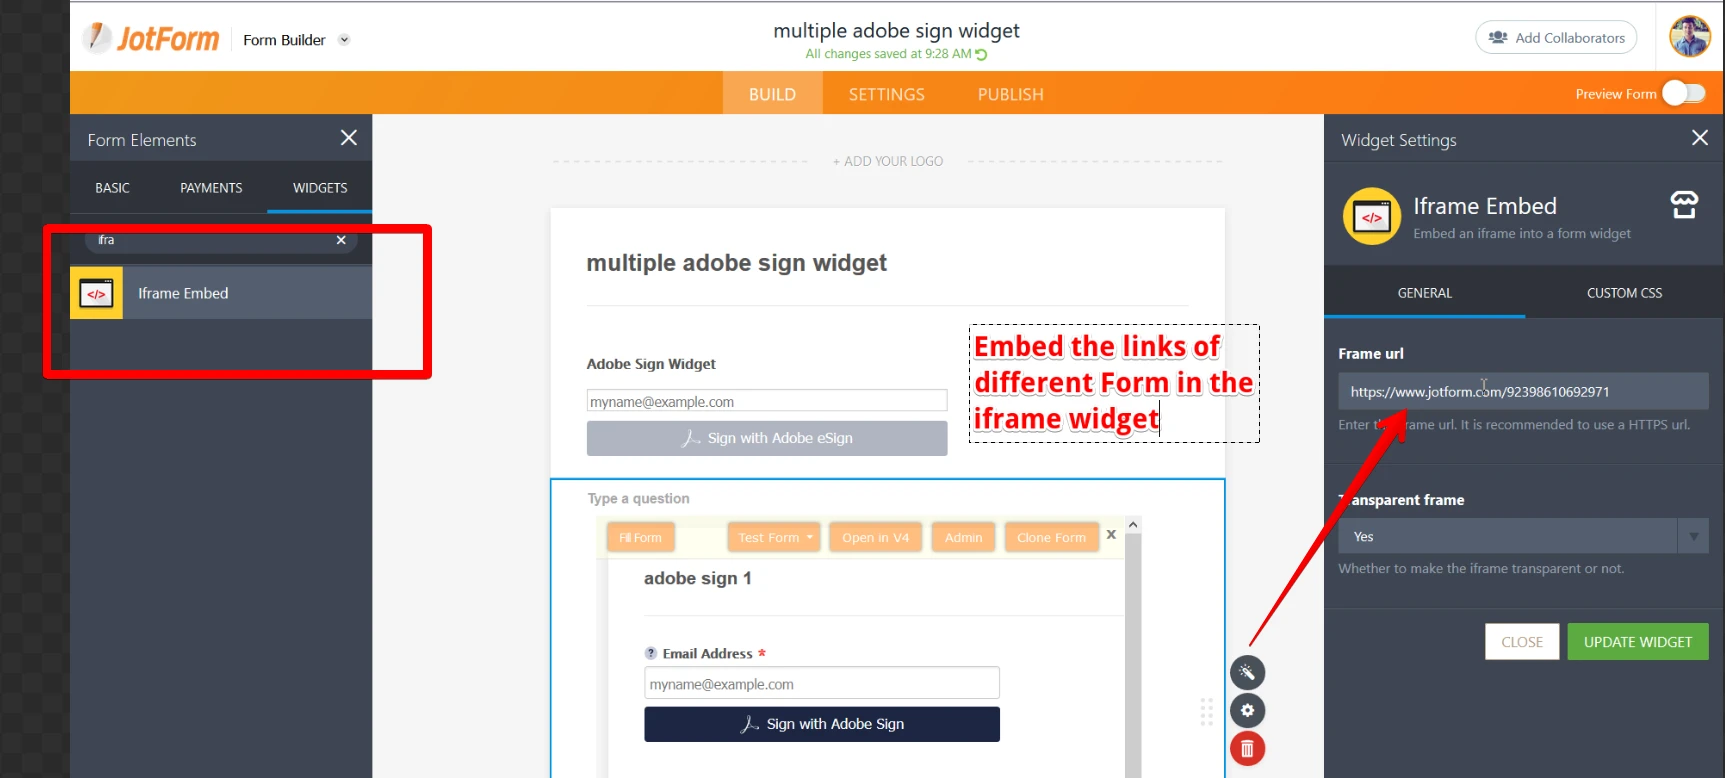 How does AdobeSign works for multiple signatories and multiple form administrators? Image 21